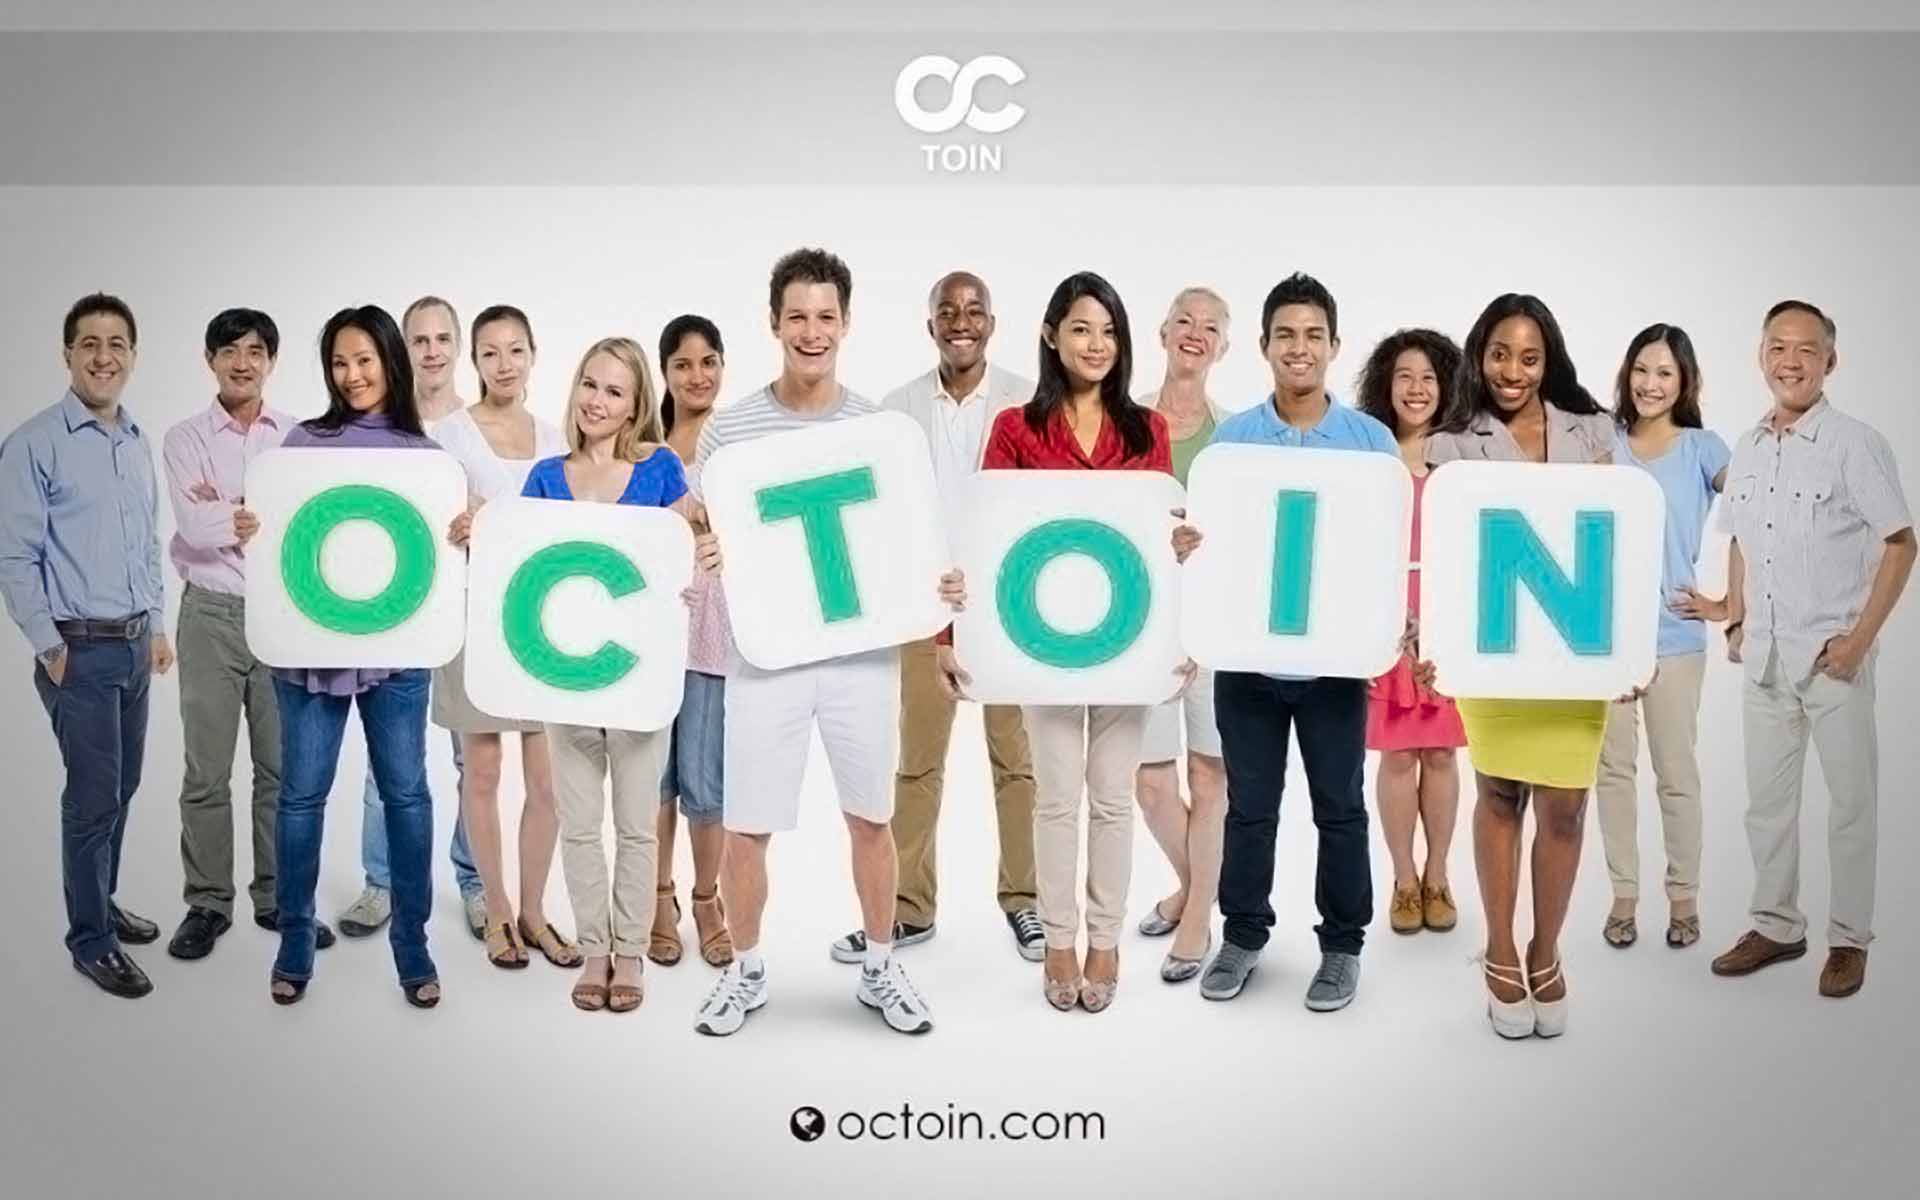 Start of Octoincoin Cryptocurrency! Octoin Project Successfully Keeps on Growing!